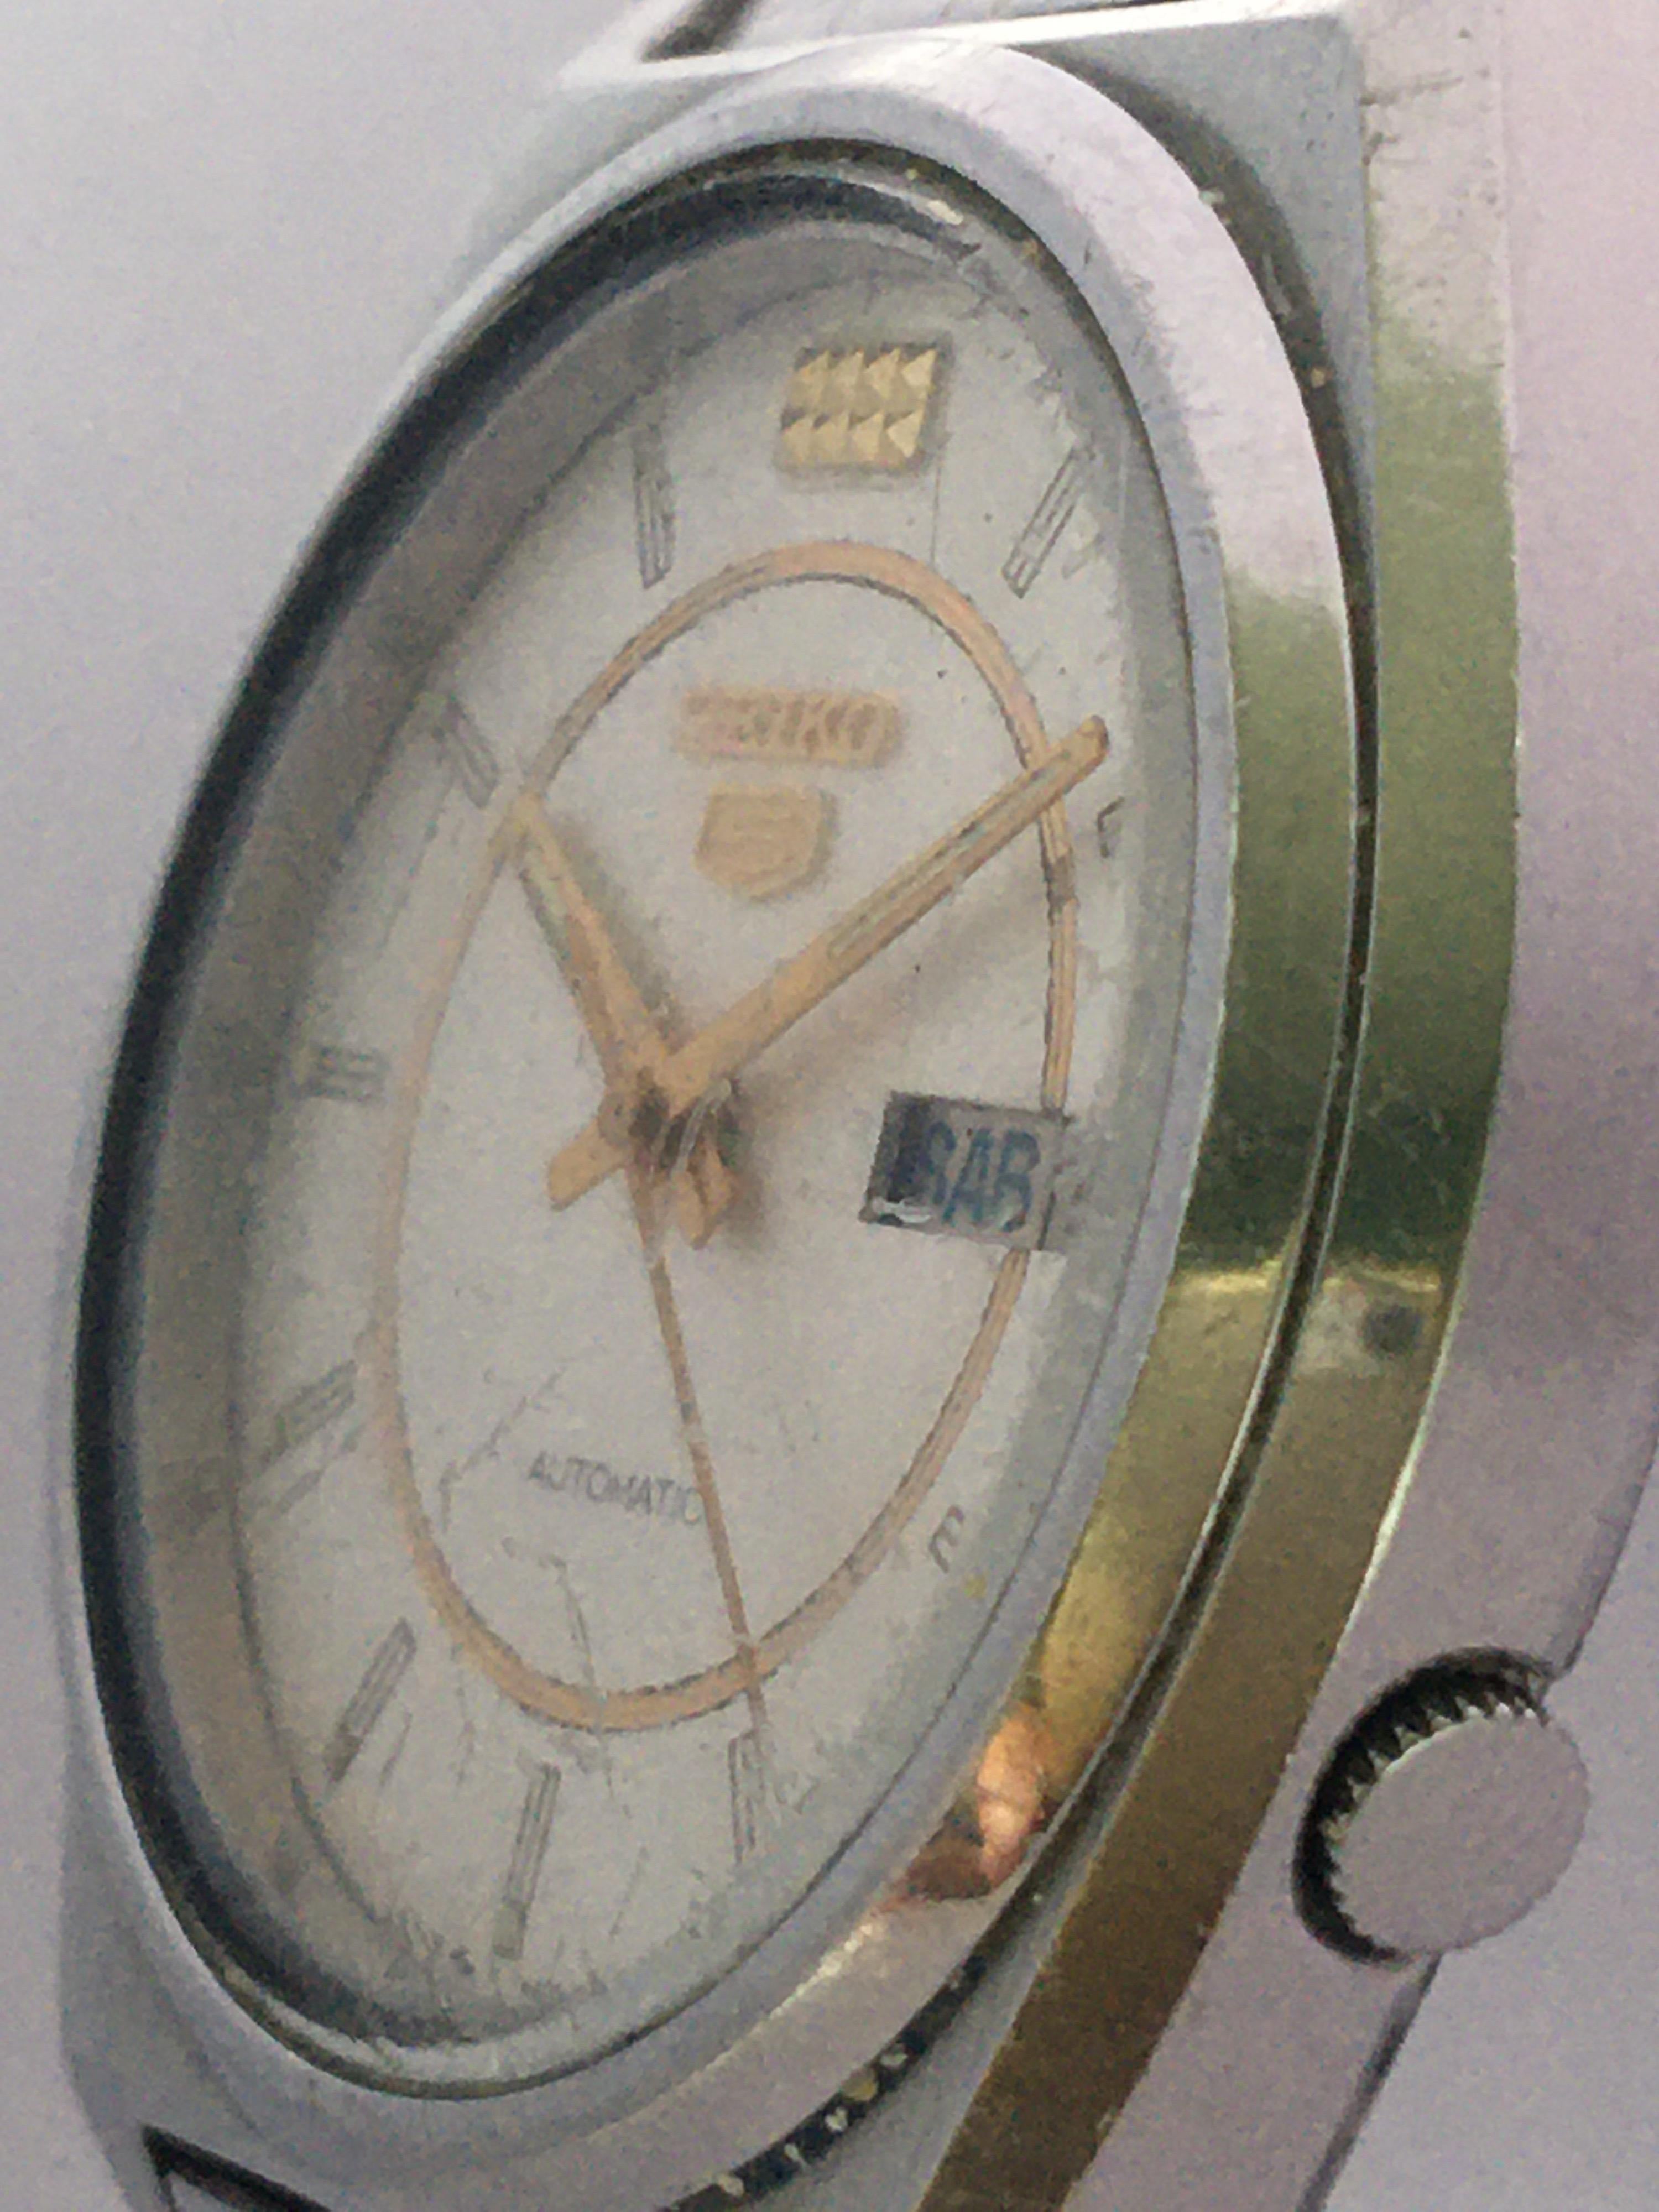 Vintage 1970s Stainless Steel Seiko 5 Automatic Gents Watch For Sale 1